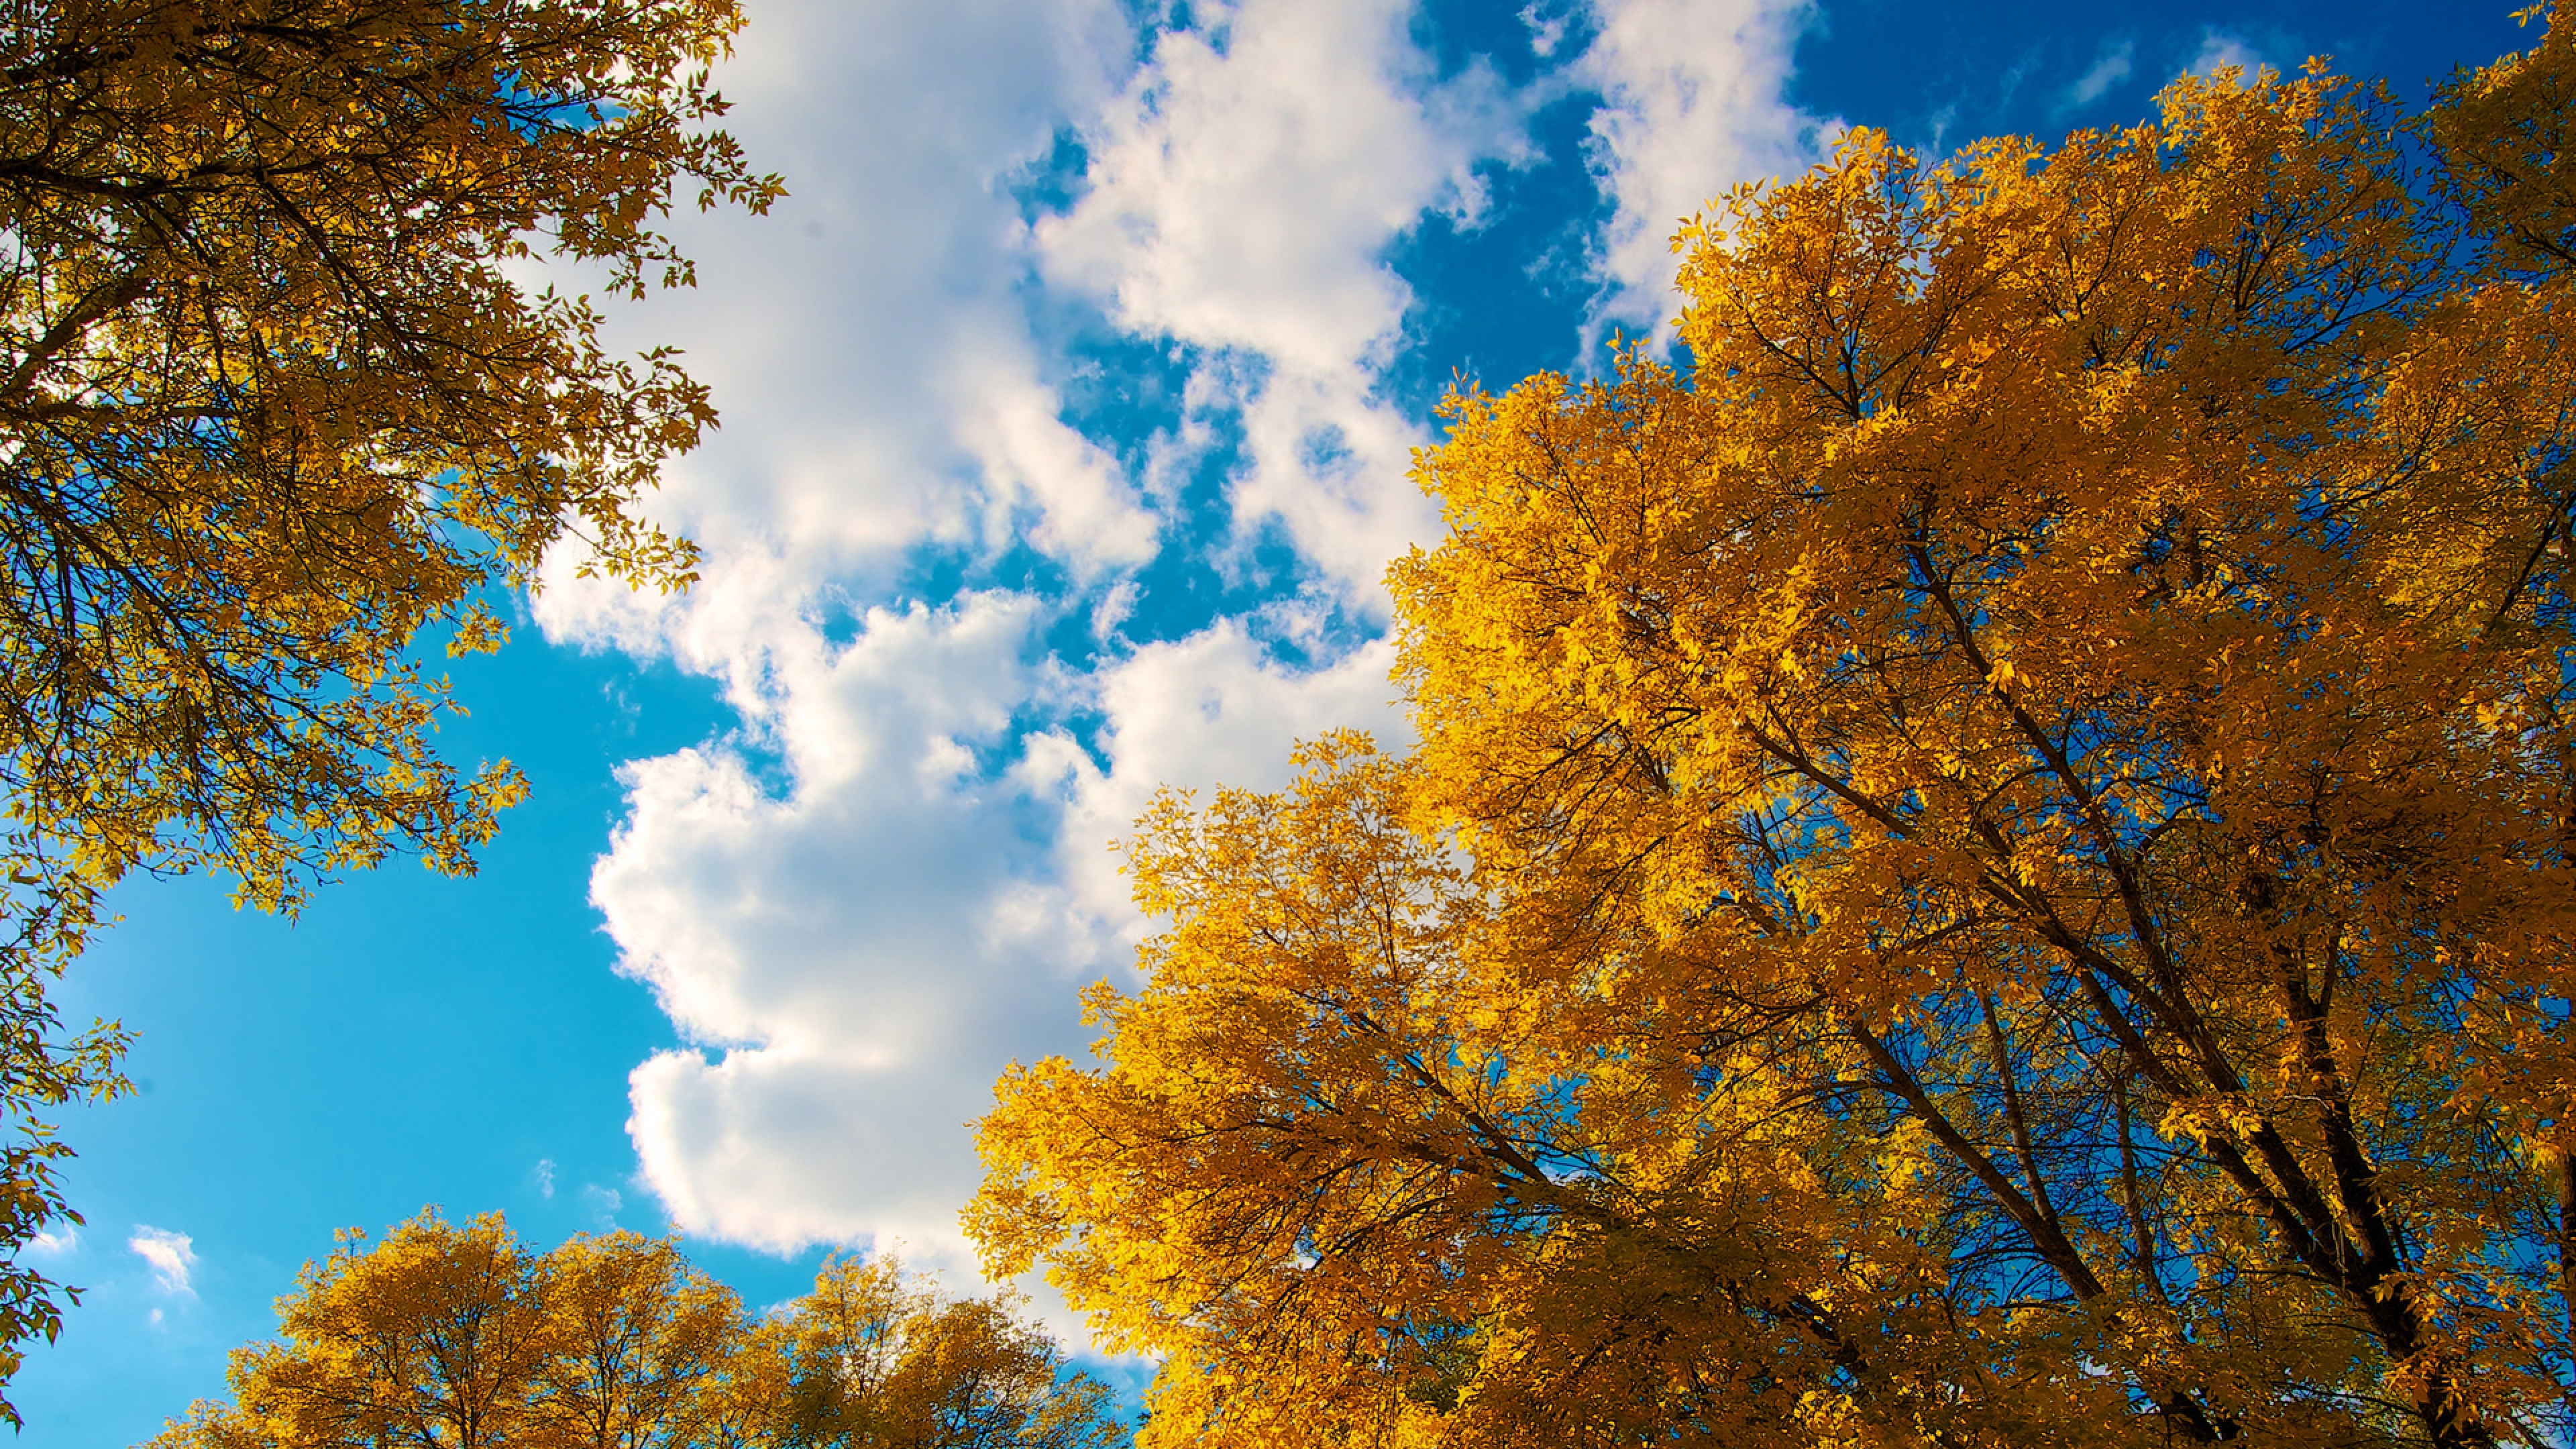 View of the sky through yellow autumn leaves